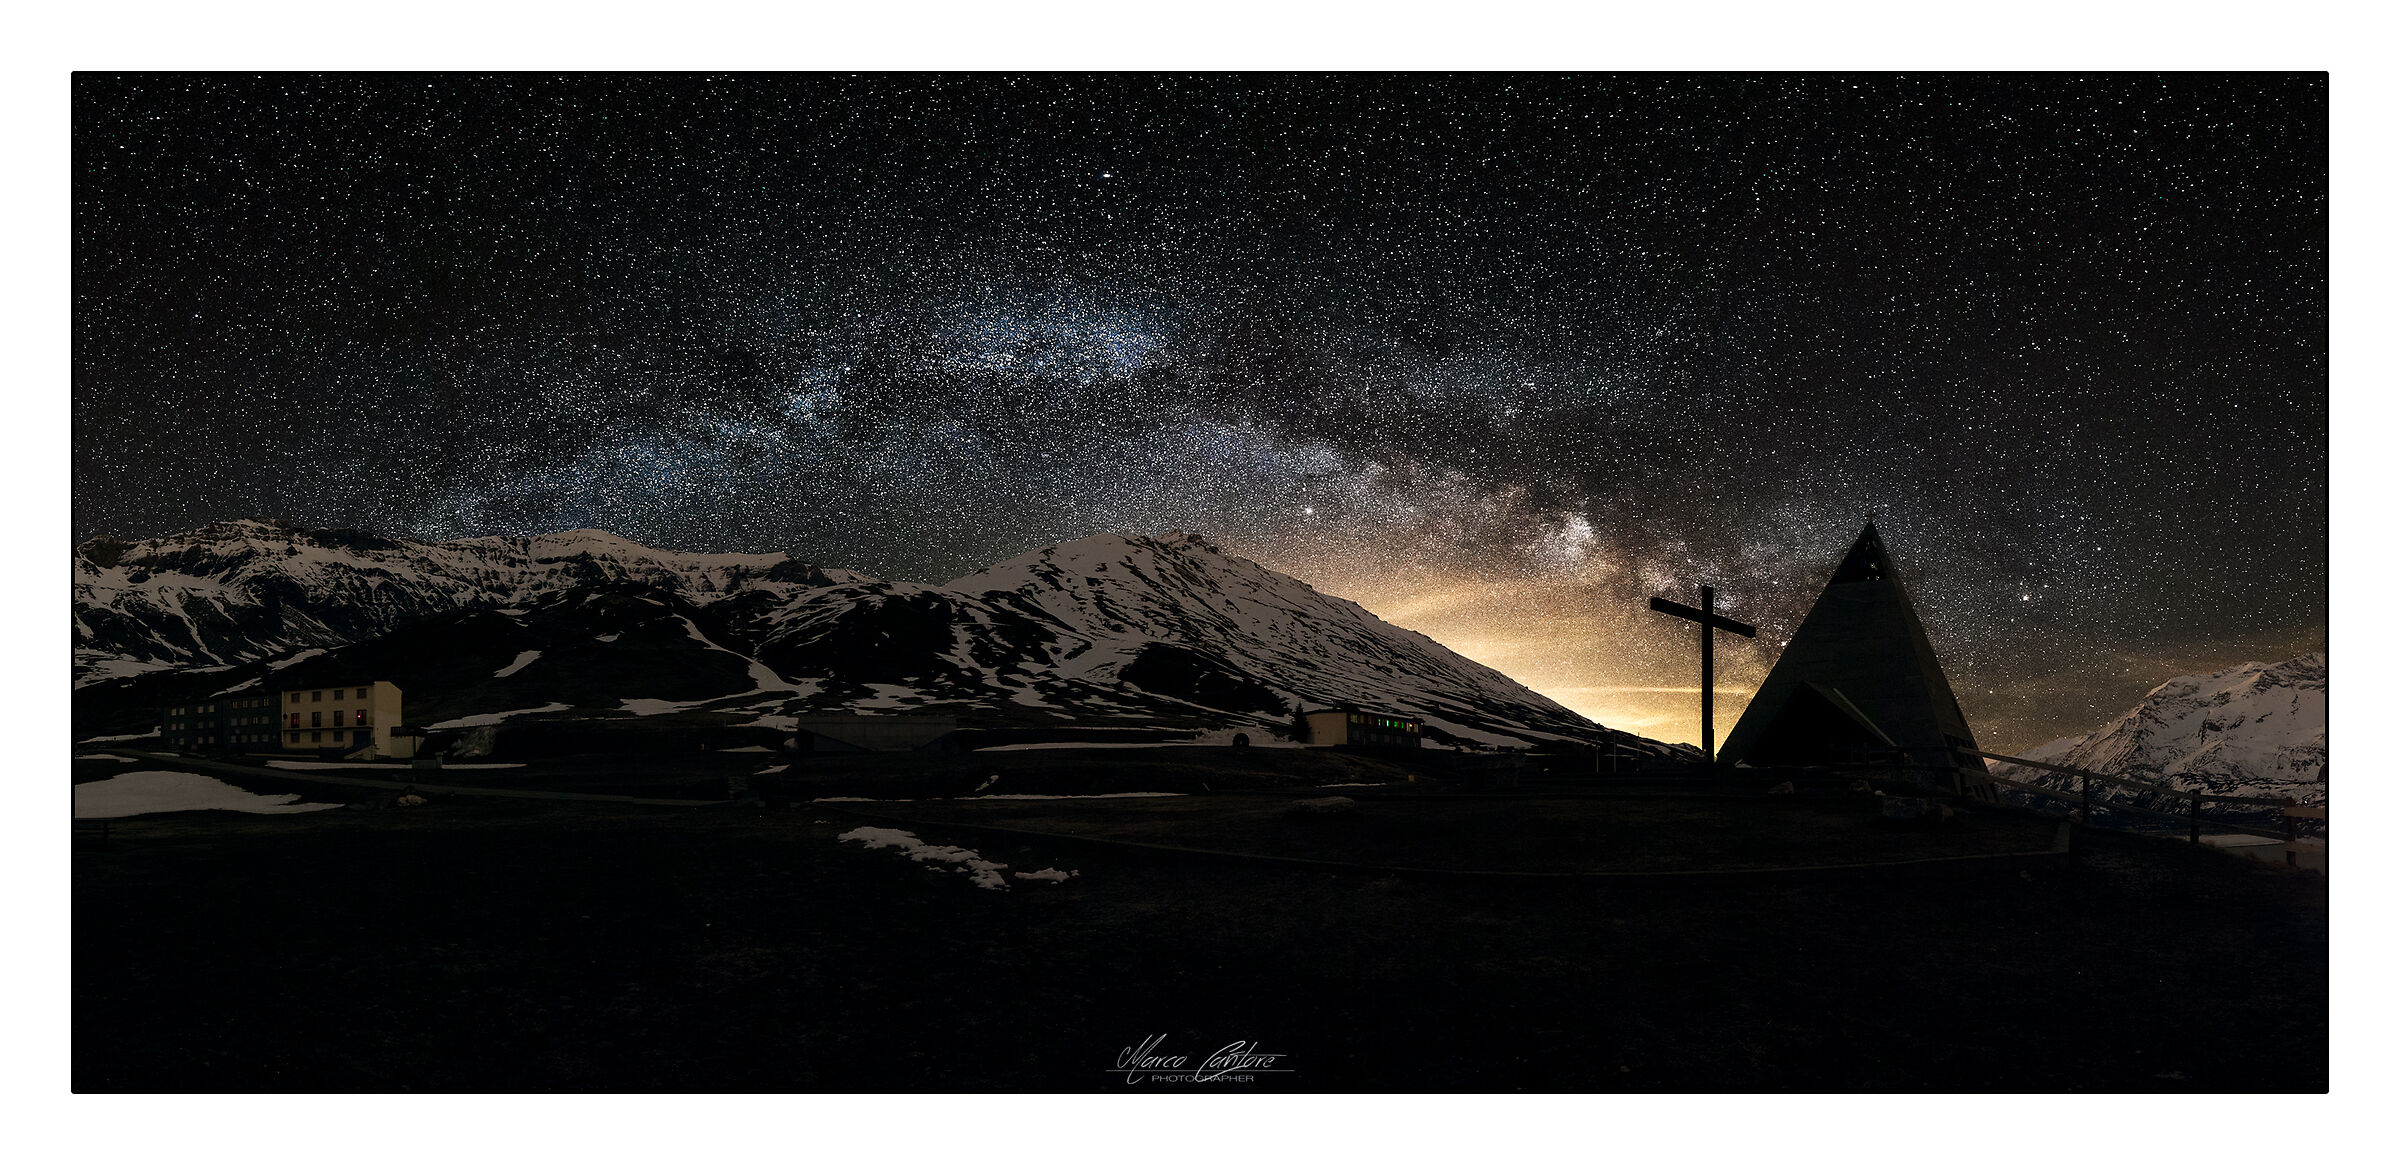 The Arch of the Milky Way from the hill of Moncenisio...